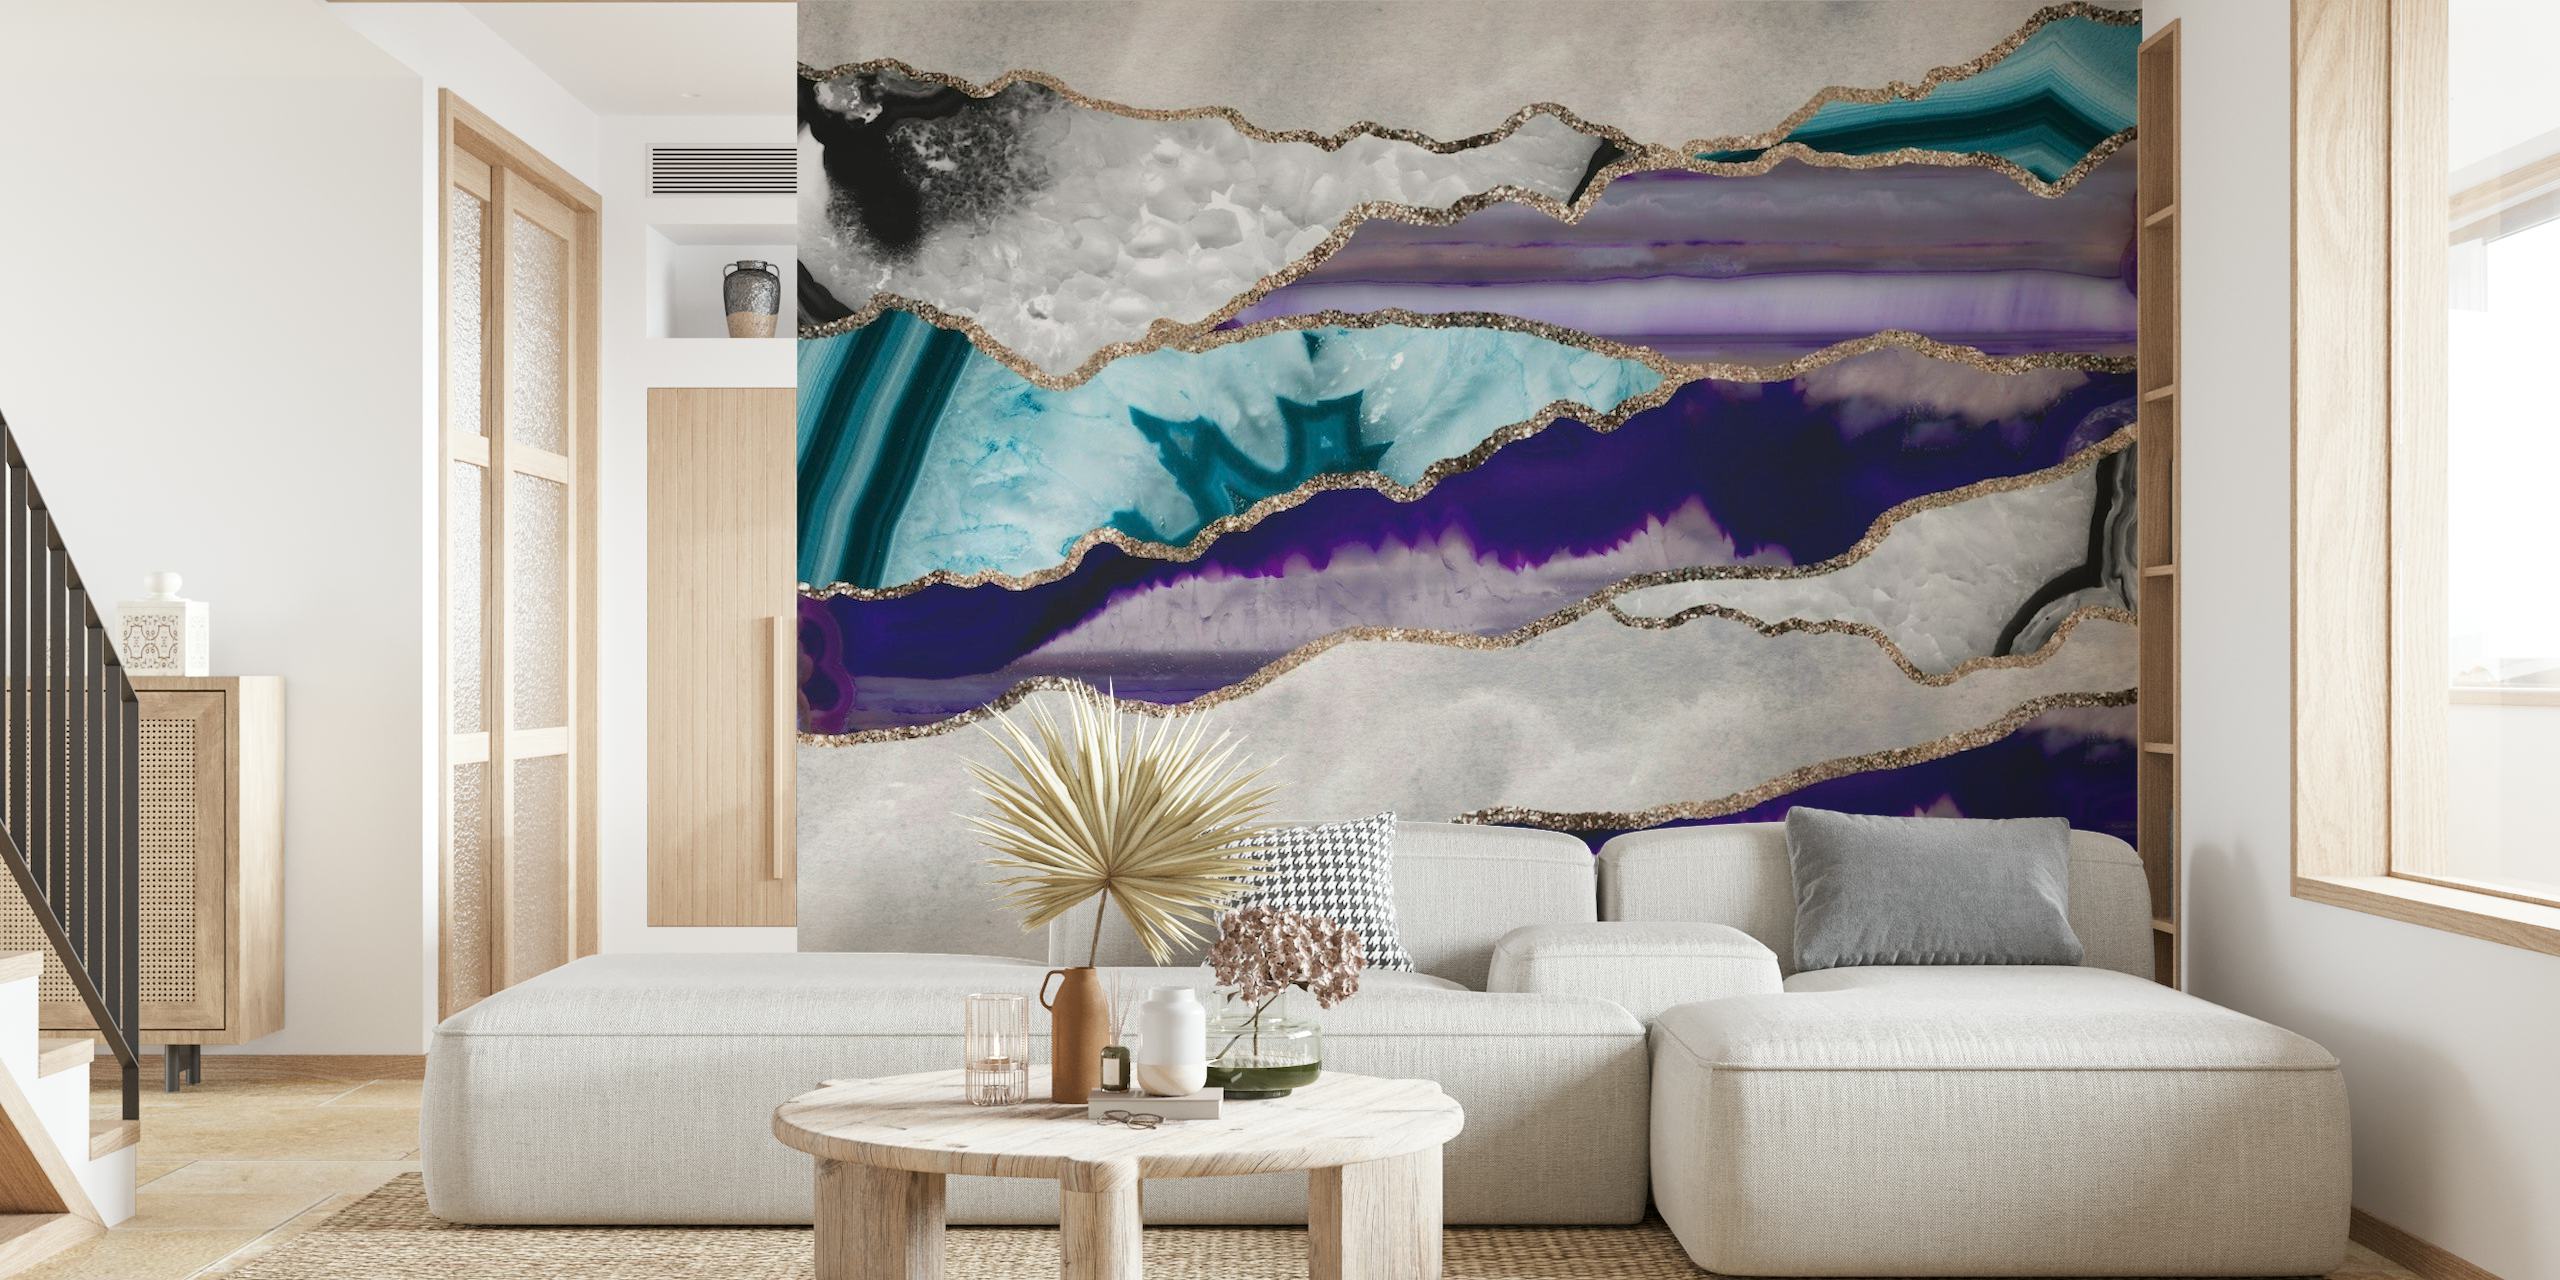 A luxuriously styled wall mural with blue and purple agate patterns and gold glitter accents